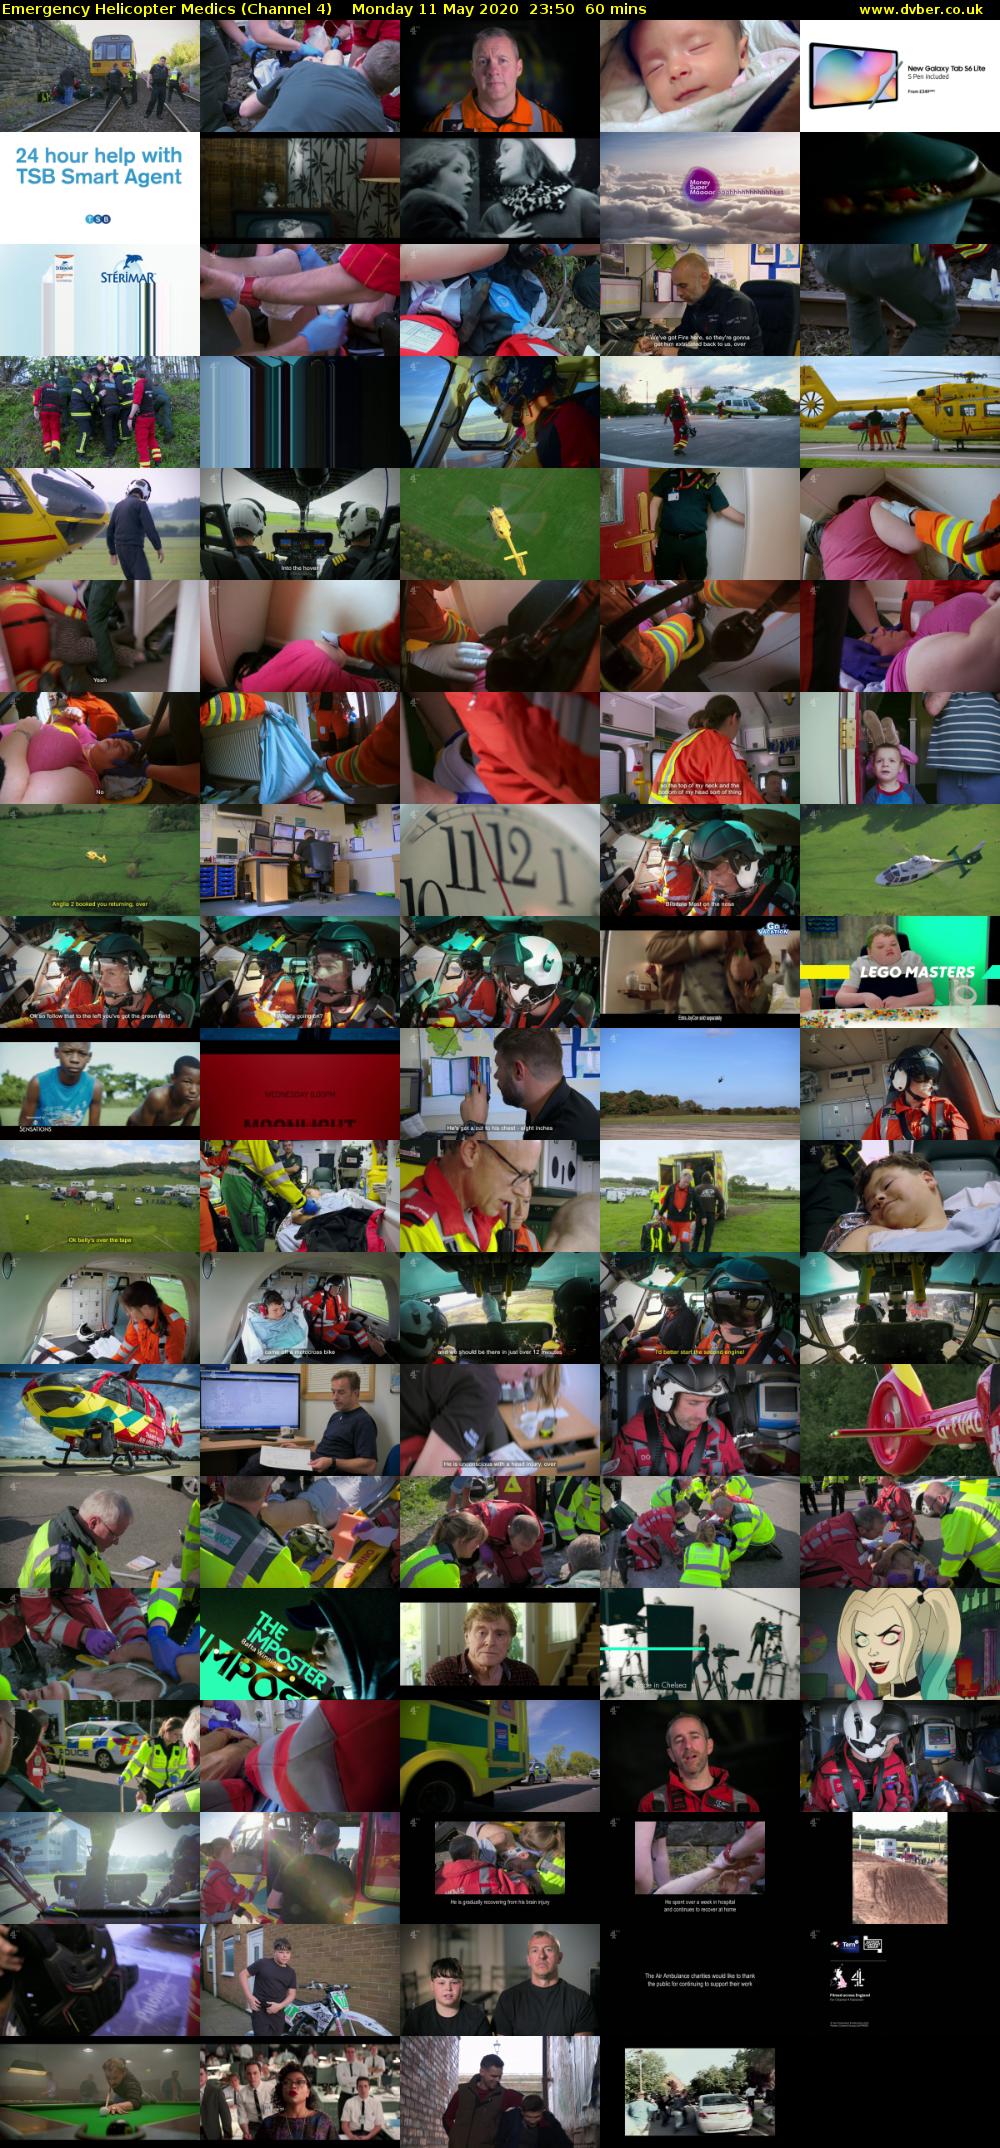 Emergency Helicopter Medics (Channel 4) Monday 11 May 2020 23:50 - 00:50